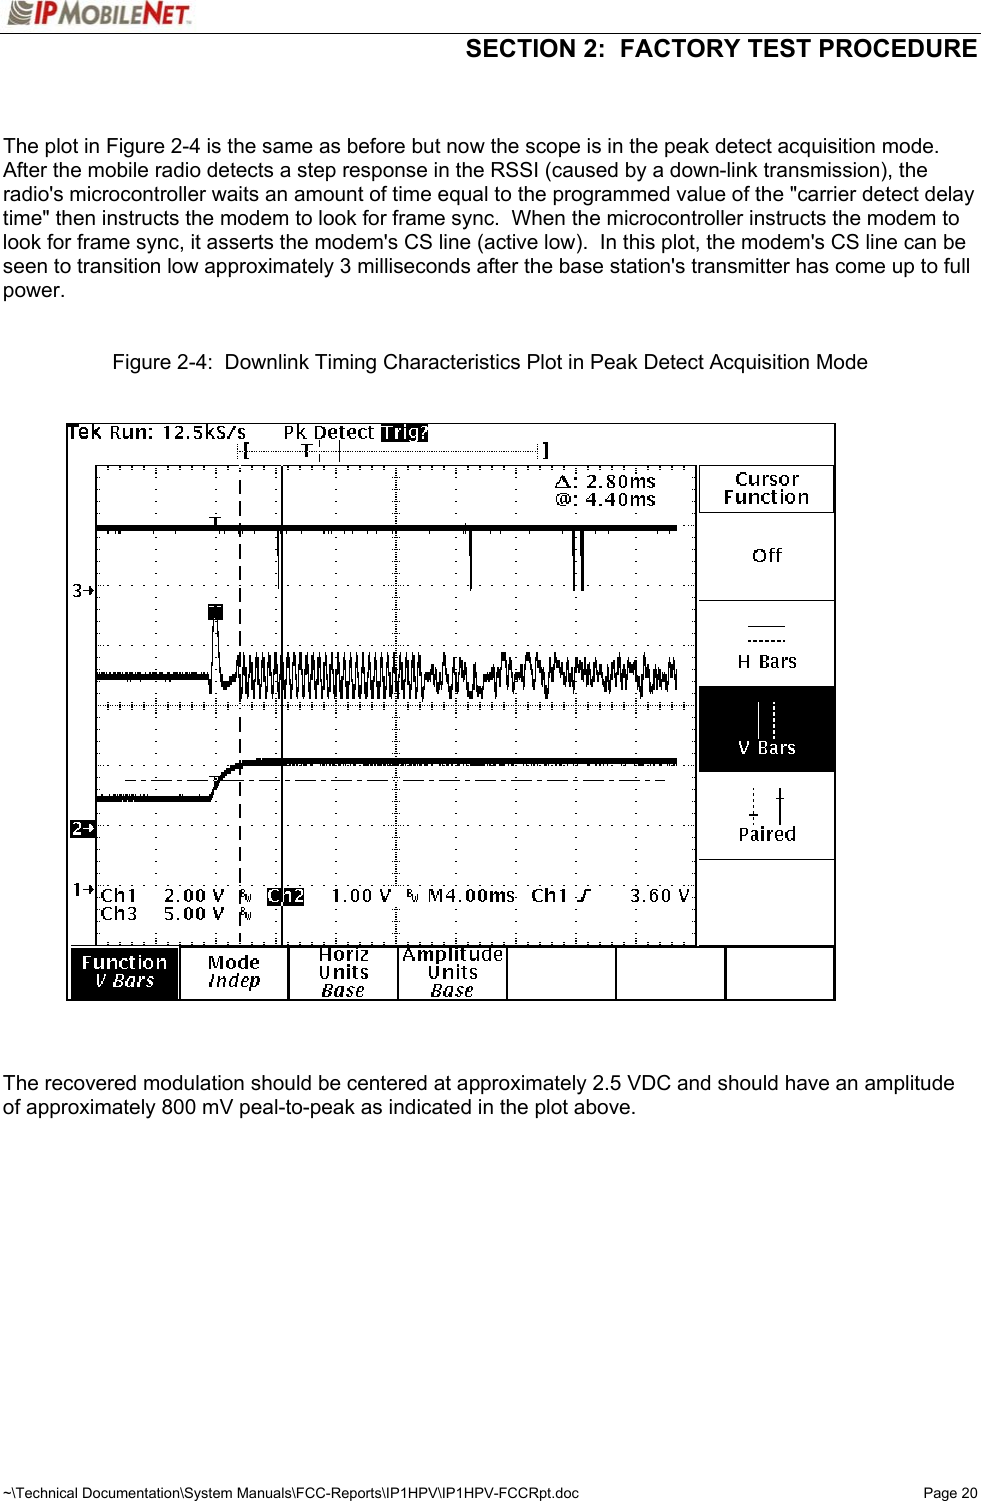   SECTION 2:  FACTORY TEST PROCEDURE  ~\Technical Documentation\System Manuals\FCC-Reports\IP1HPV\IP1HPV-FCCRpt.doc  Page 20   The plot in Figure 2-4 is the same as before but now the scope is in the peak detect acquisition mode.  After the mobile radio detects a step response in the RSSI (caused by a down-link transmission), the radio&apos;s microcontroller waits an amount of time equal to the programmed value of the &quot;carrier detect delay time&quot; then instructs the modem to look for frame sync.  When the microcontroller instructs the modem to look for frame sync, it asserts the modem&apos;s CS line (active low).  In this plot, the modem&apos;s CS line can be seen to transition low approximately 3 milliseconds after the base station&apos;s transmitter has come up to full power.    Figure 2-4:  Downlink Timing Characteristics Plot in Peak Detect Acquisition Mode      The recovered modulation should be centered at approximately 2.5 VDC and should have an amplitude of approximately 800 mV peal-to-peak as indicated in the plot above.